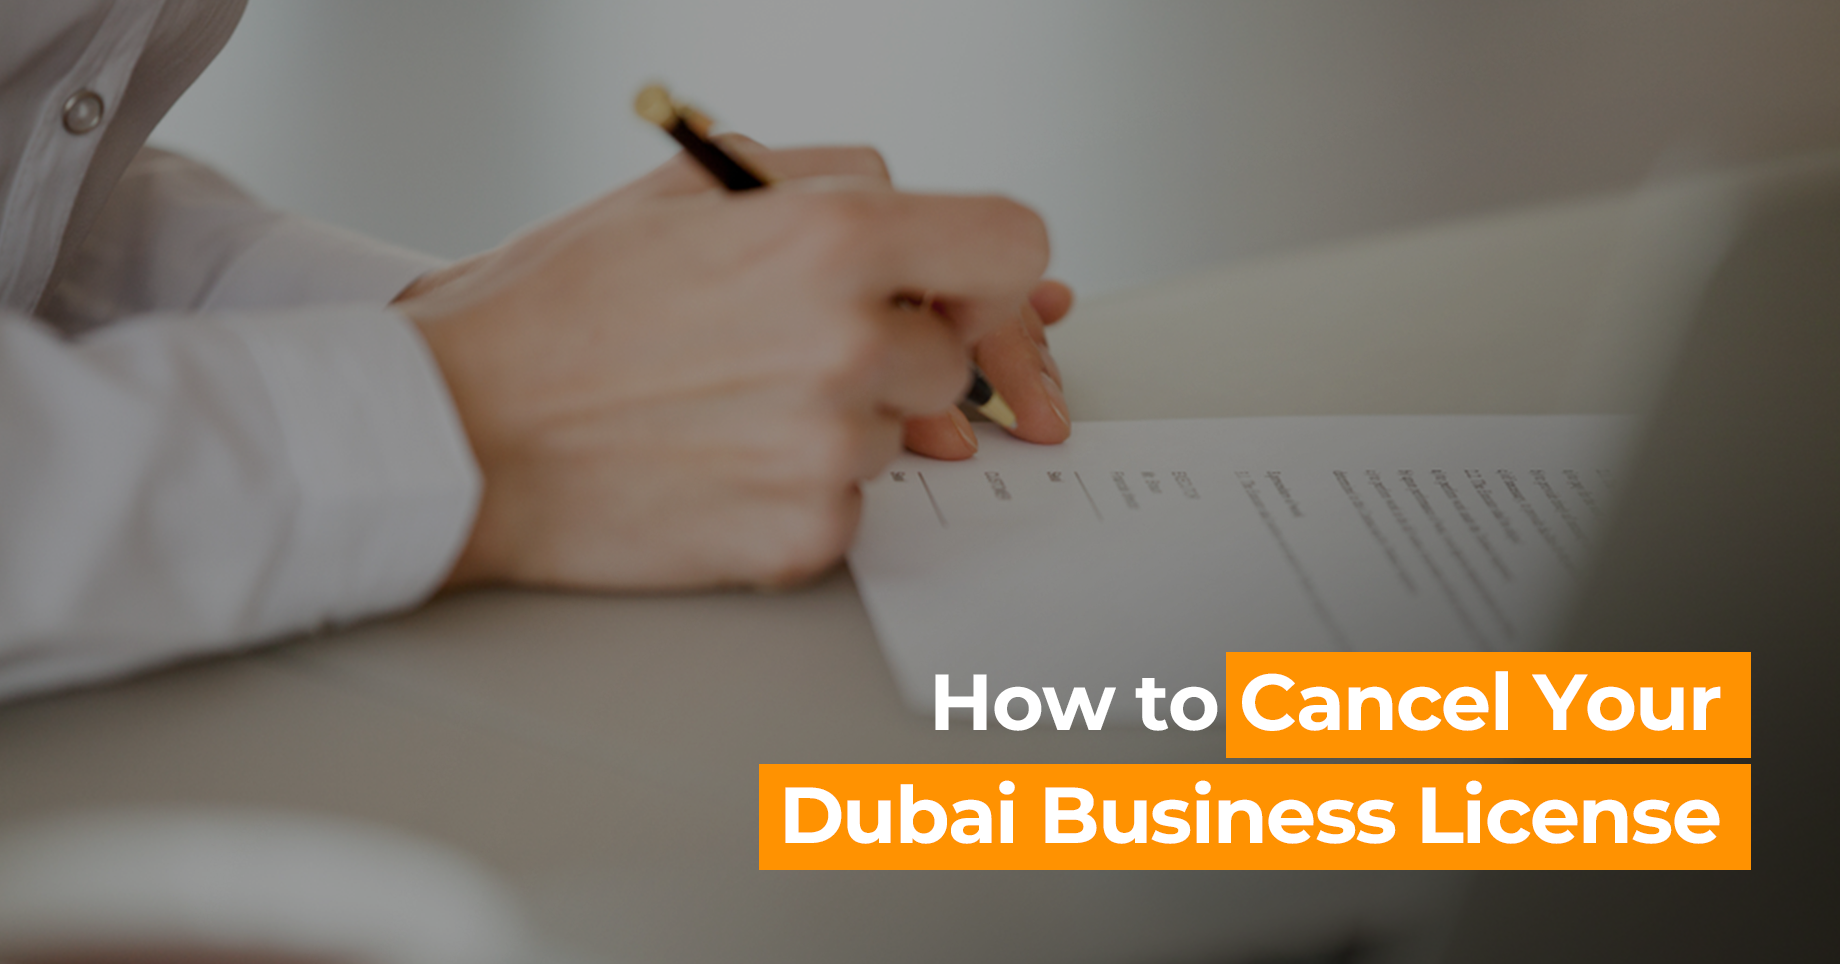 How to Cancel Your Dubai Business License